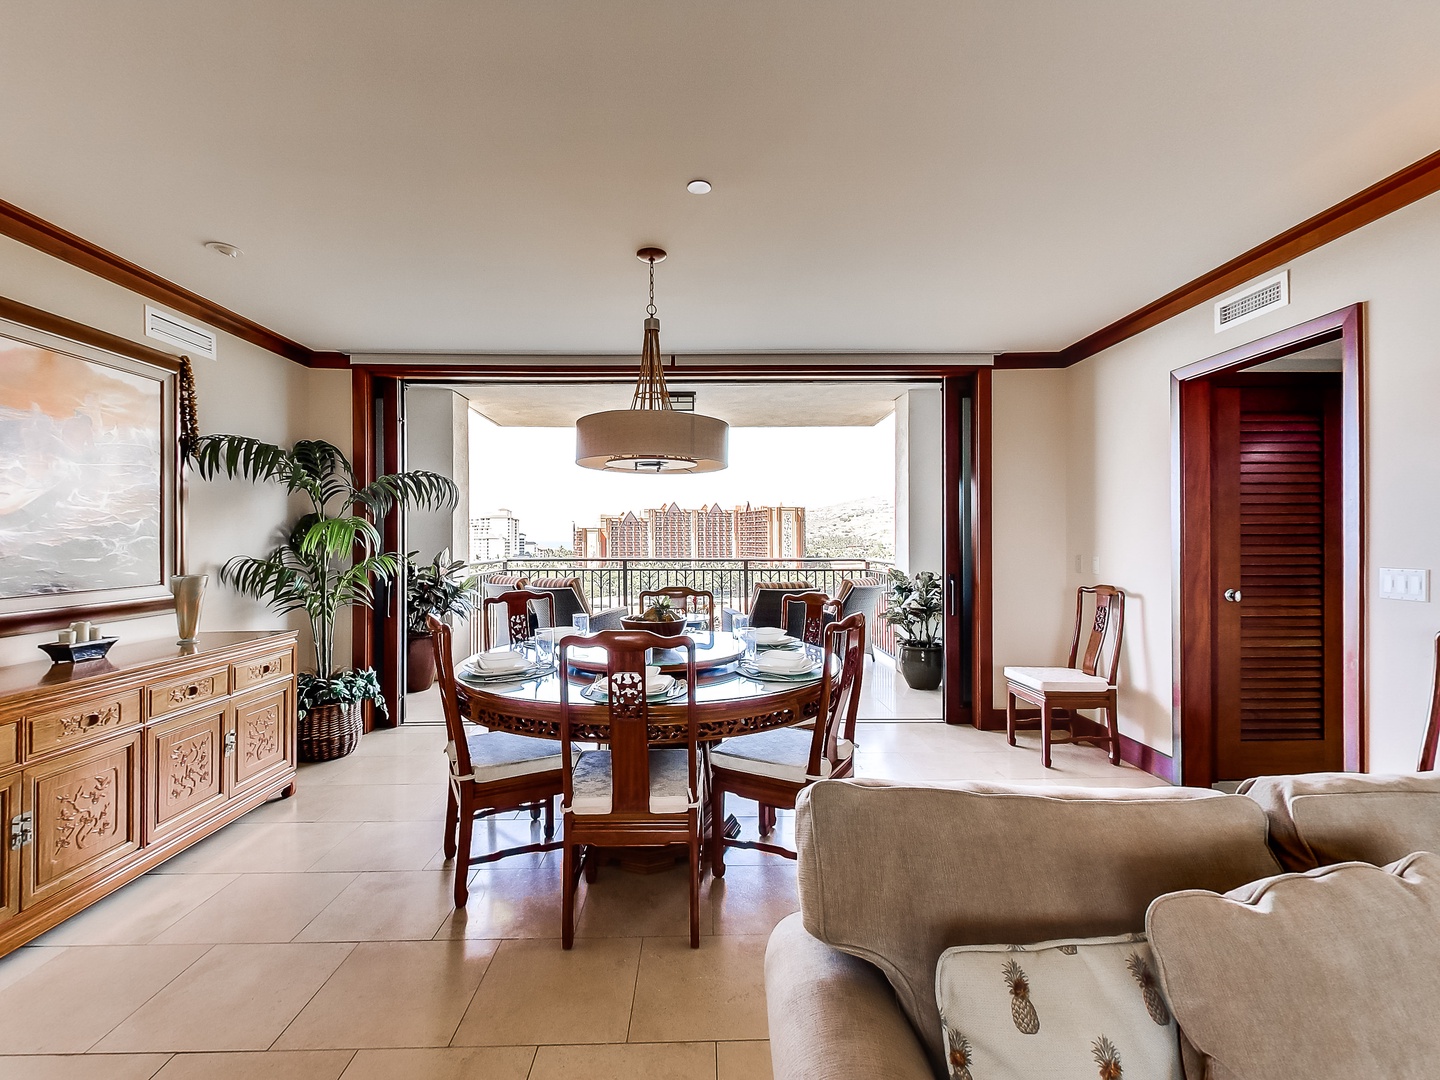 Kapolei Vacation Rentals, Ko Olina Beach Villas O1011 - There's plenty of seating for game night overlooking the resort.